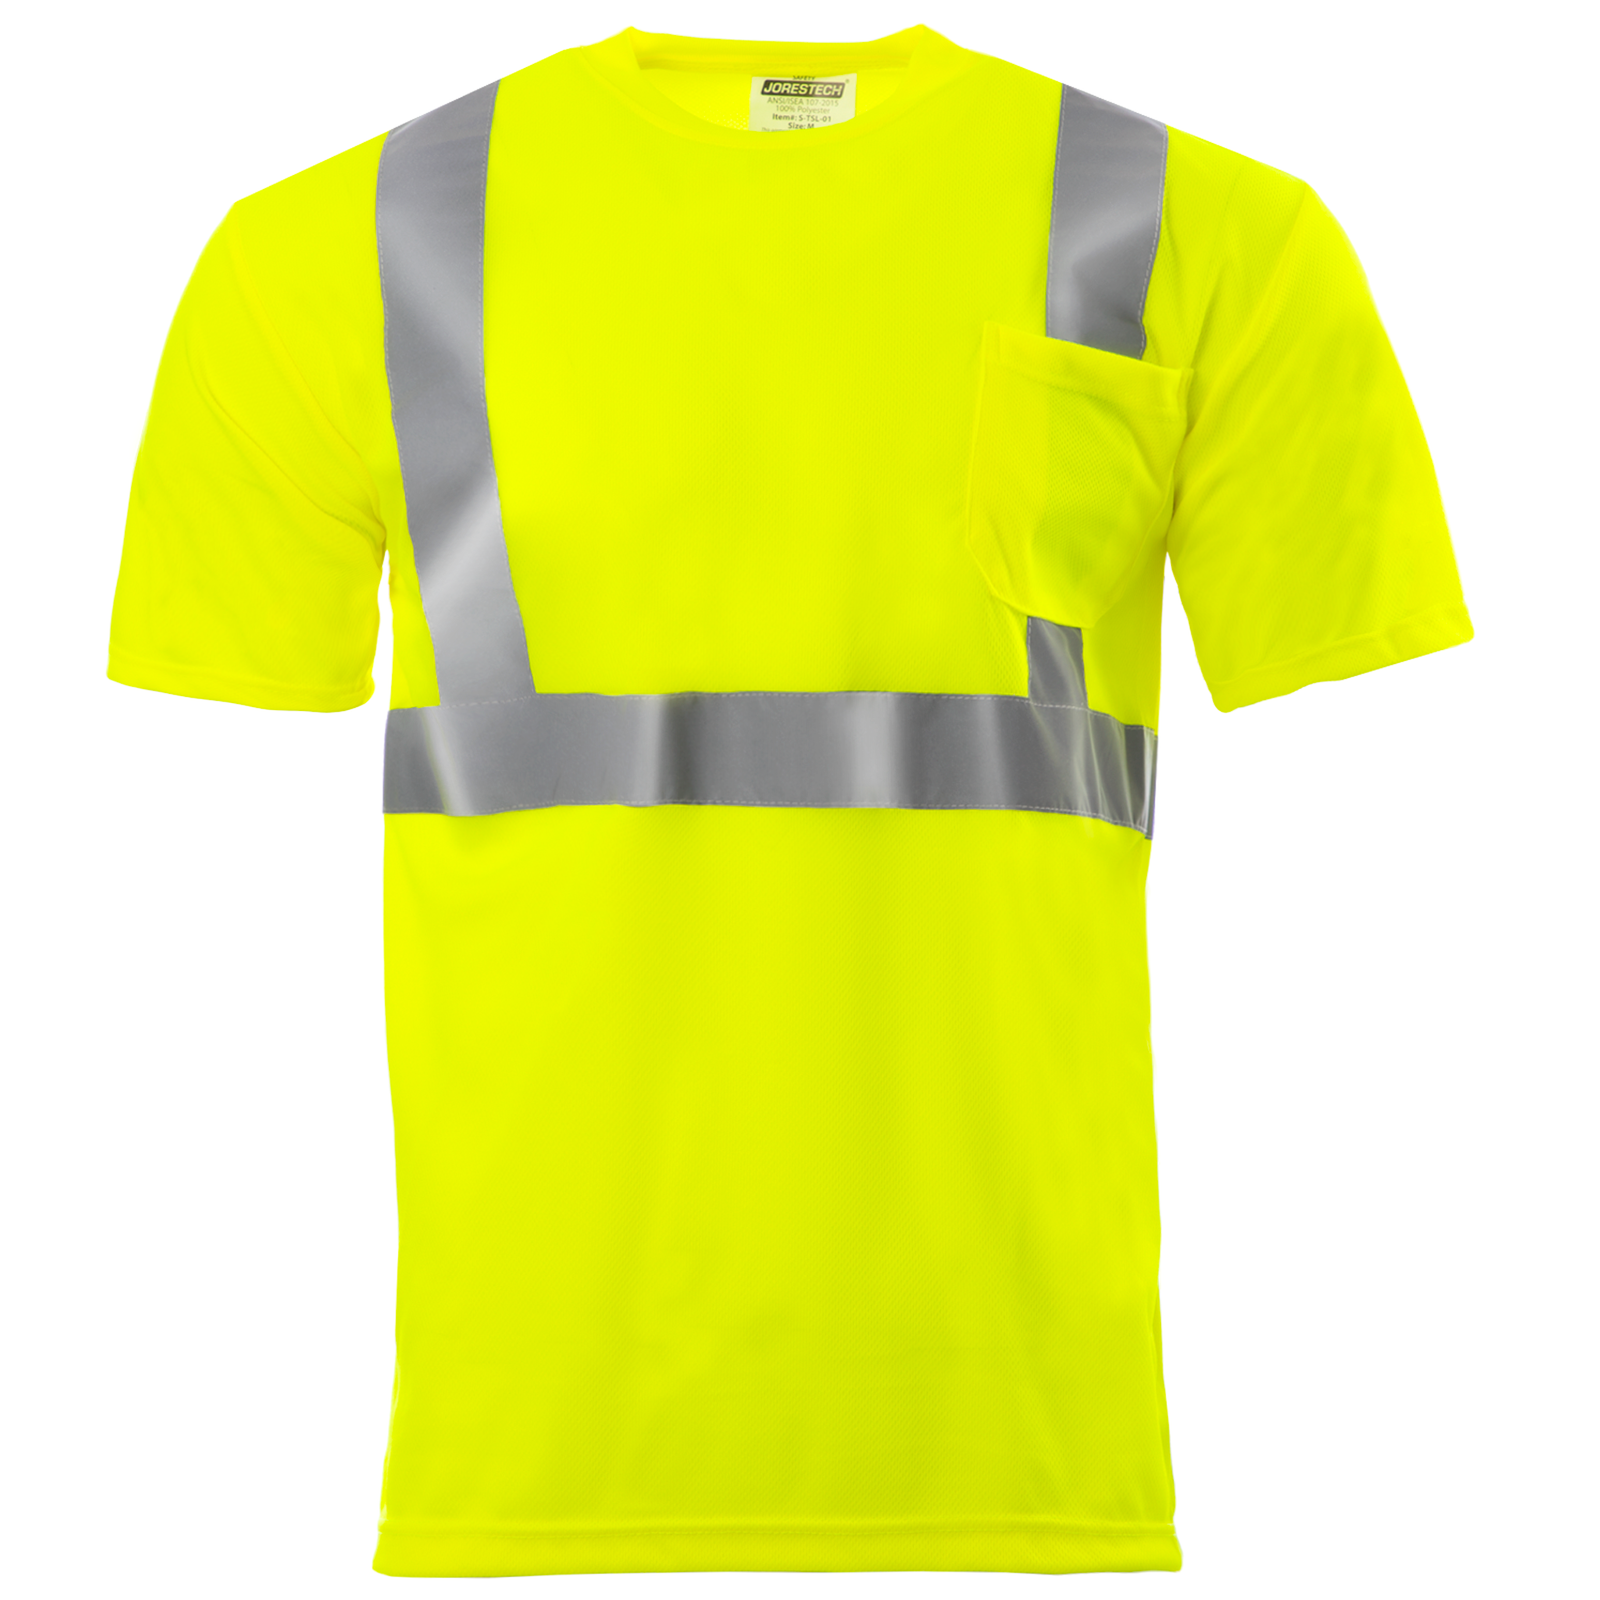 Front view of the yellow/lime hi-vis reflective safety pocket JORESTECH short sleeve shirt with breathable birds eye fabric